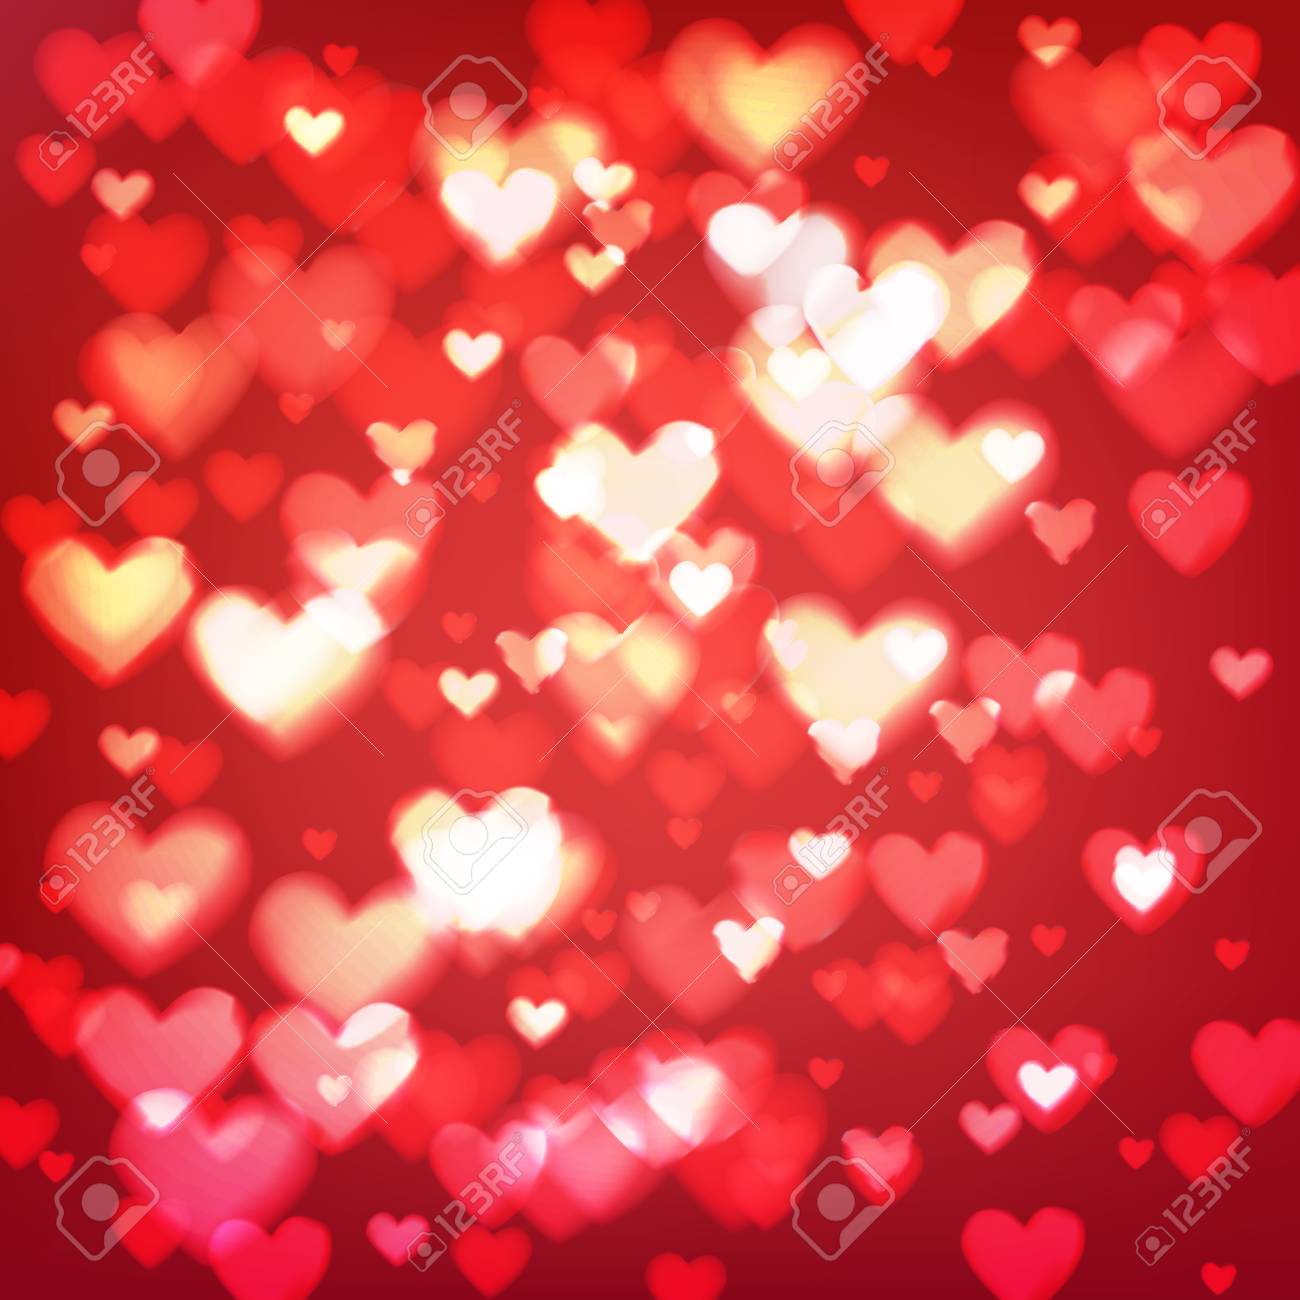 Abstract Romantic Red Background With Hearts And Bokeh Lights